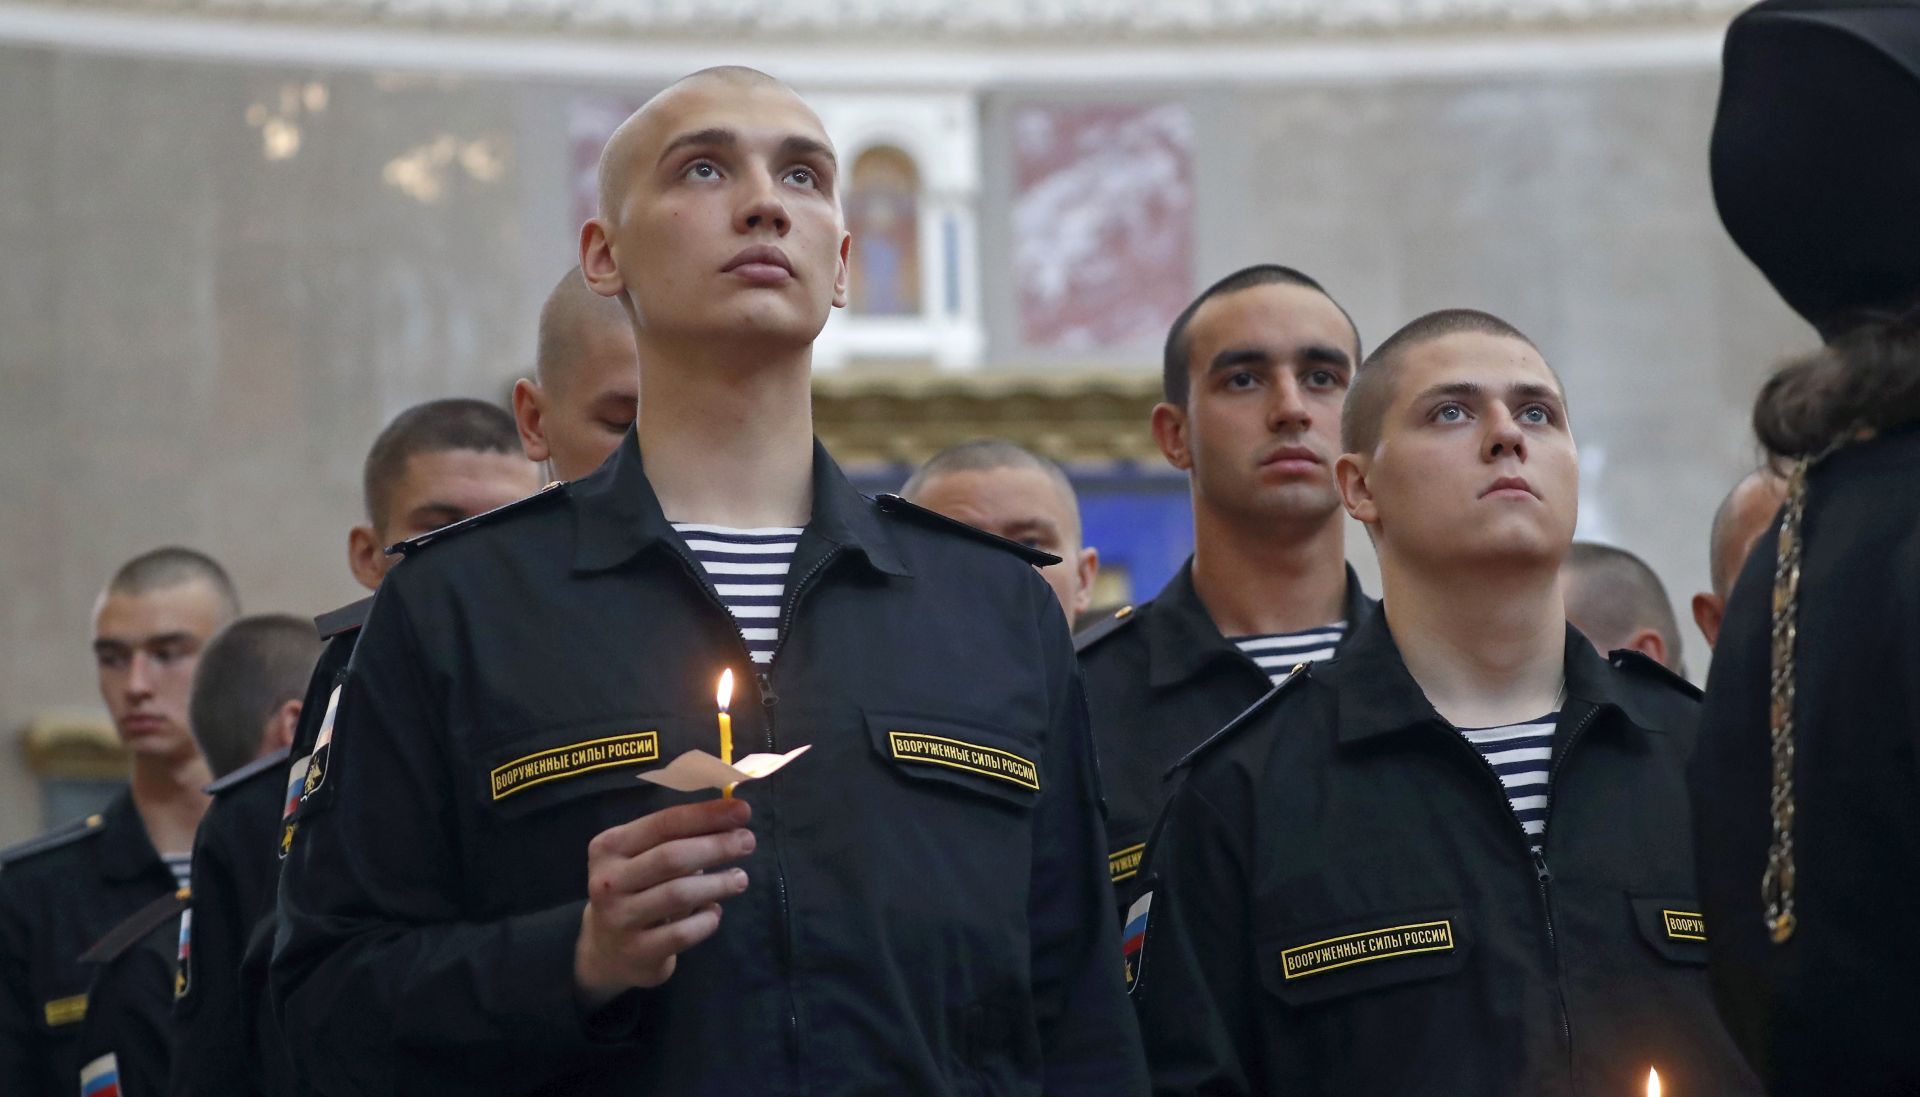 epa07693791 Orthodox priests, navy sailors and civilians attend a memorial service at Kronshtadt Navy Cathedral for fourteen sailors who died in the Barents Sea in Kronshtadt, outside St. Petersburg, Russia, 04 July 2019. Fourteen people died from suspected smoke poisoning aboard Losharik submarine vessel in the Barents Sea on 01 July.  EPA/ANATOLY MALTSEV